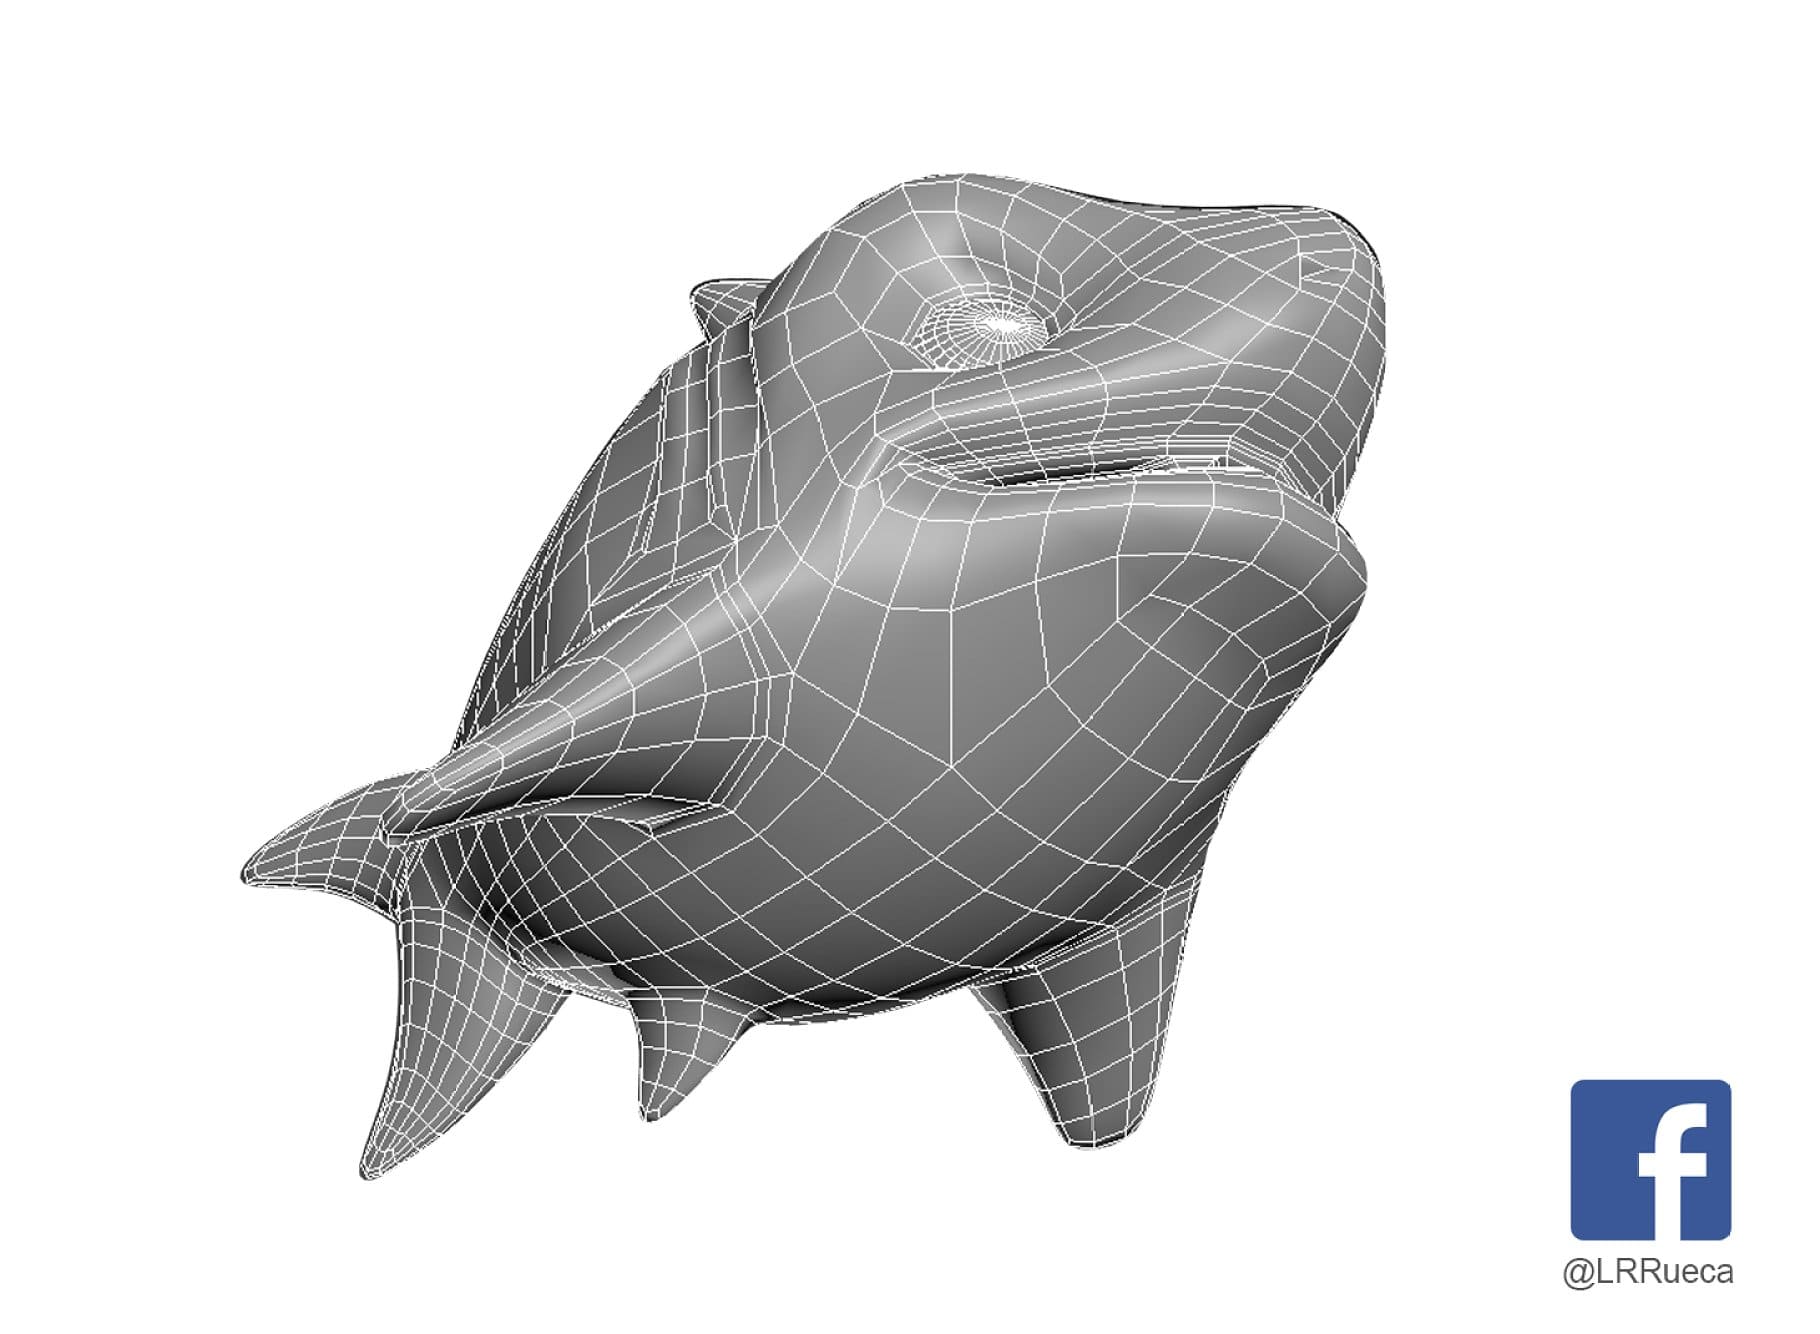 3D model of the lower part of a stylized shark.